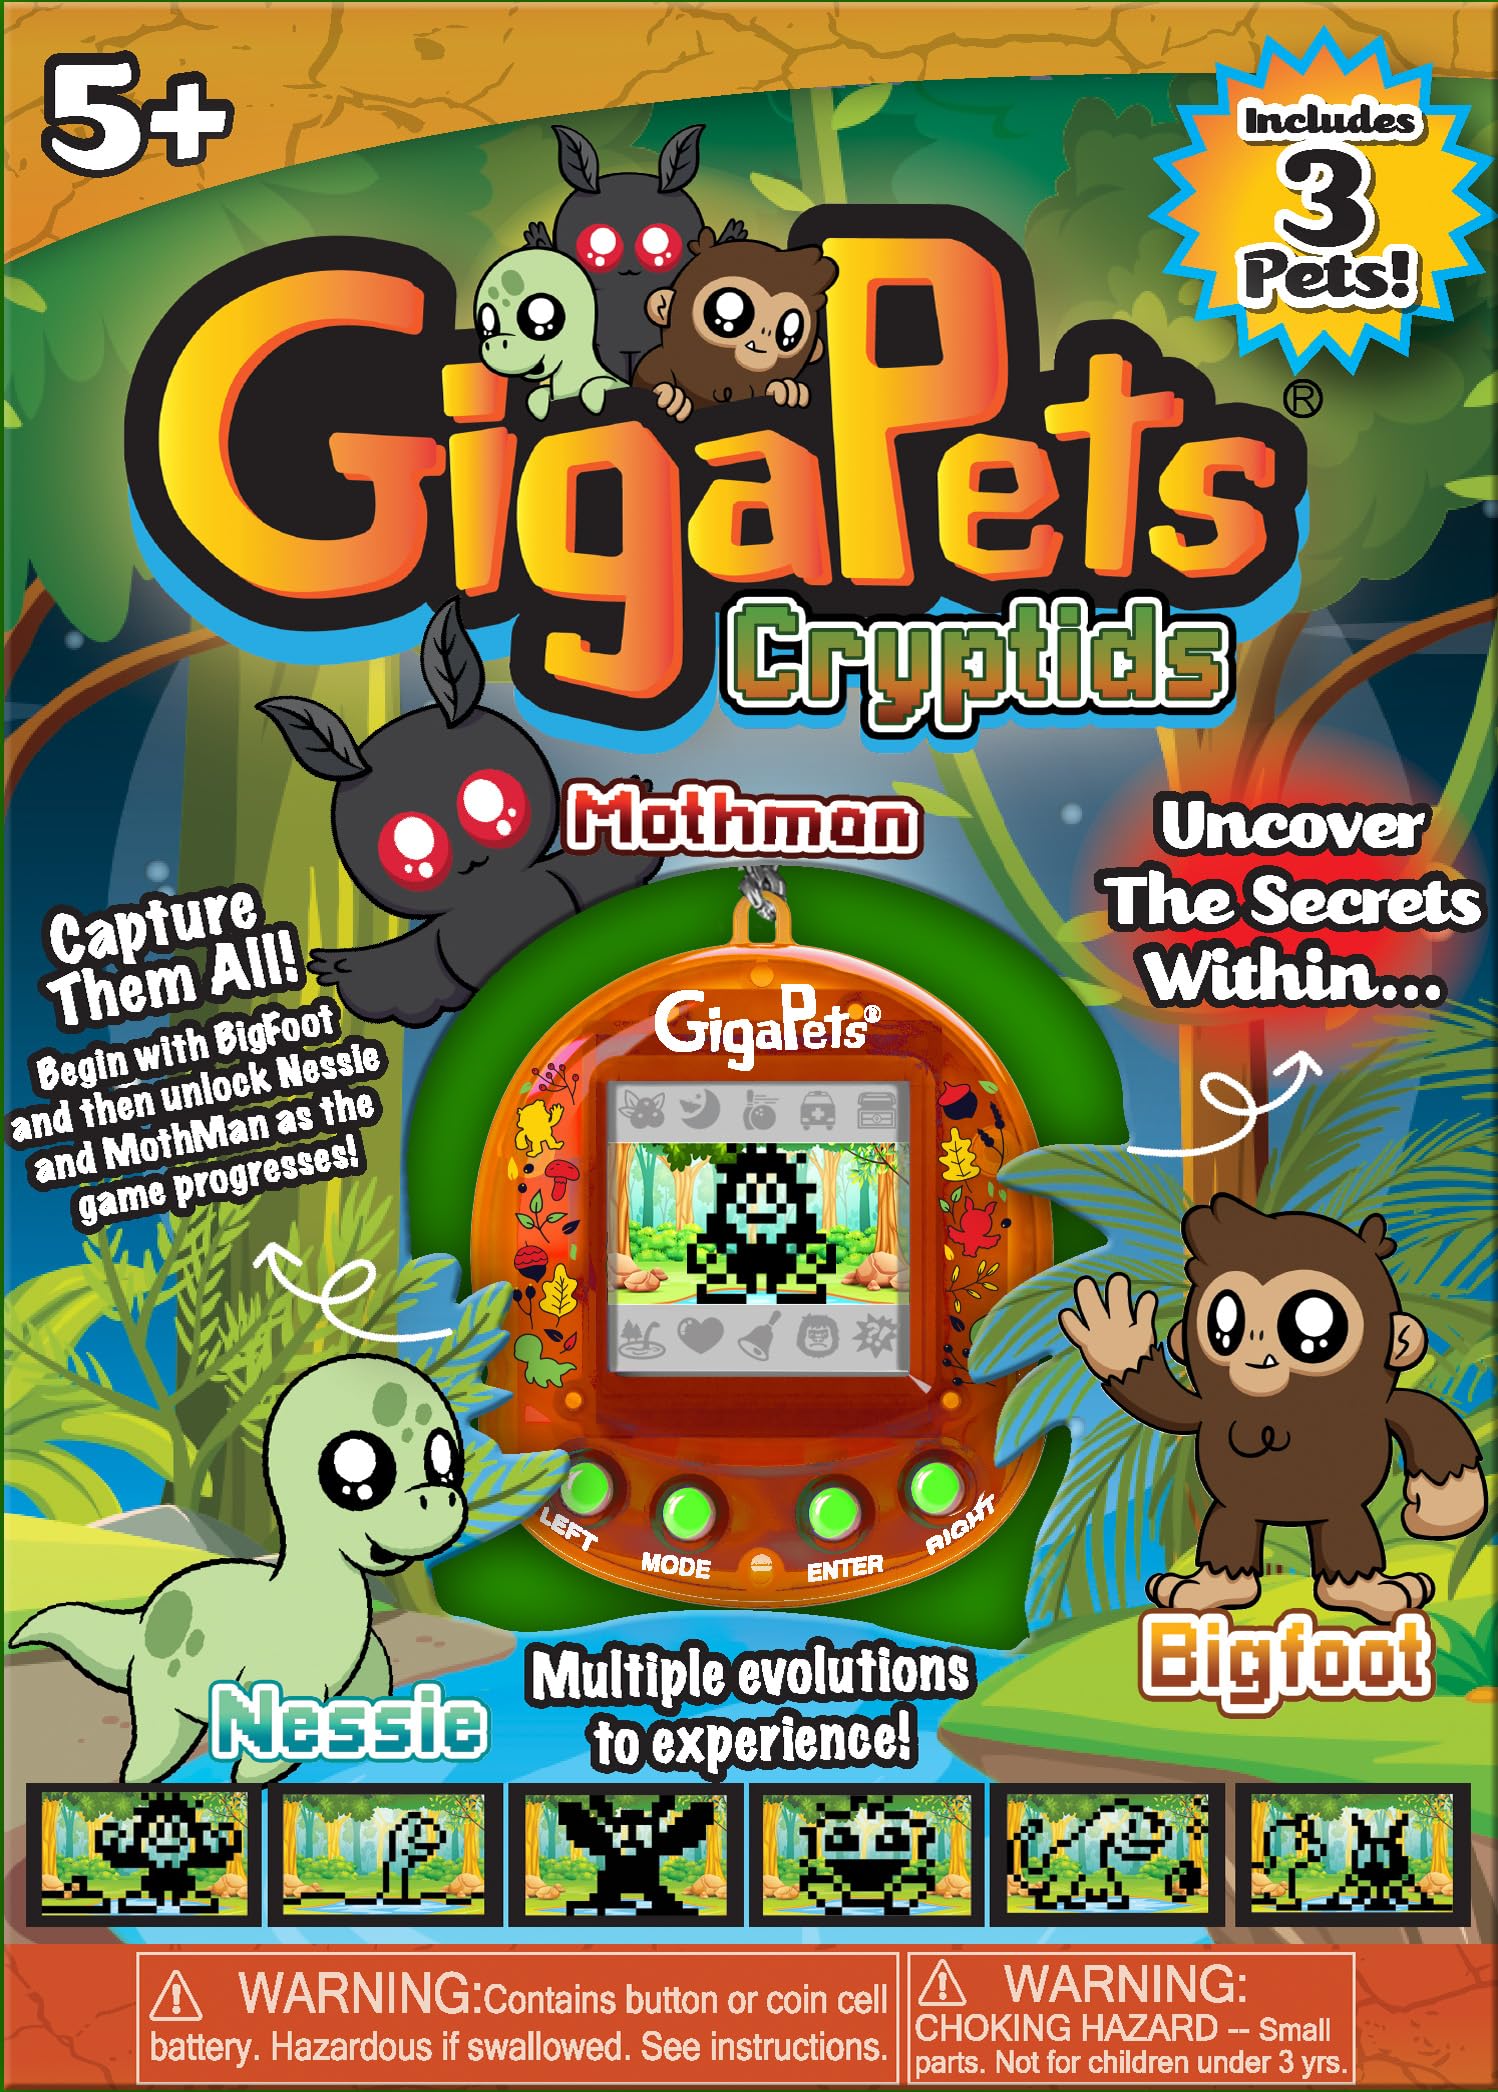 Top Secret Toys GigaPets Cryptids, New Glossy Housing Shell, Classic 90s CompuKitty, 3D Pet Live in Motion